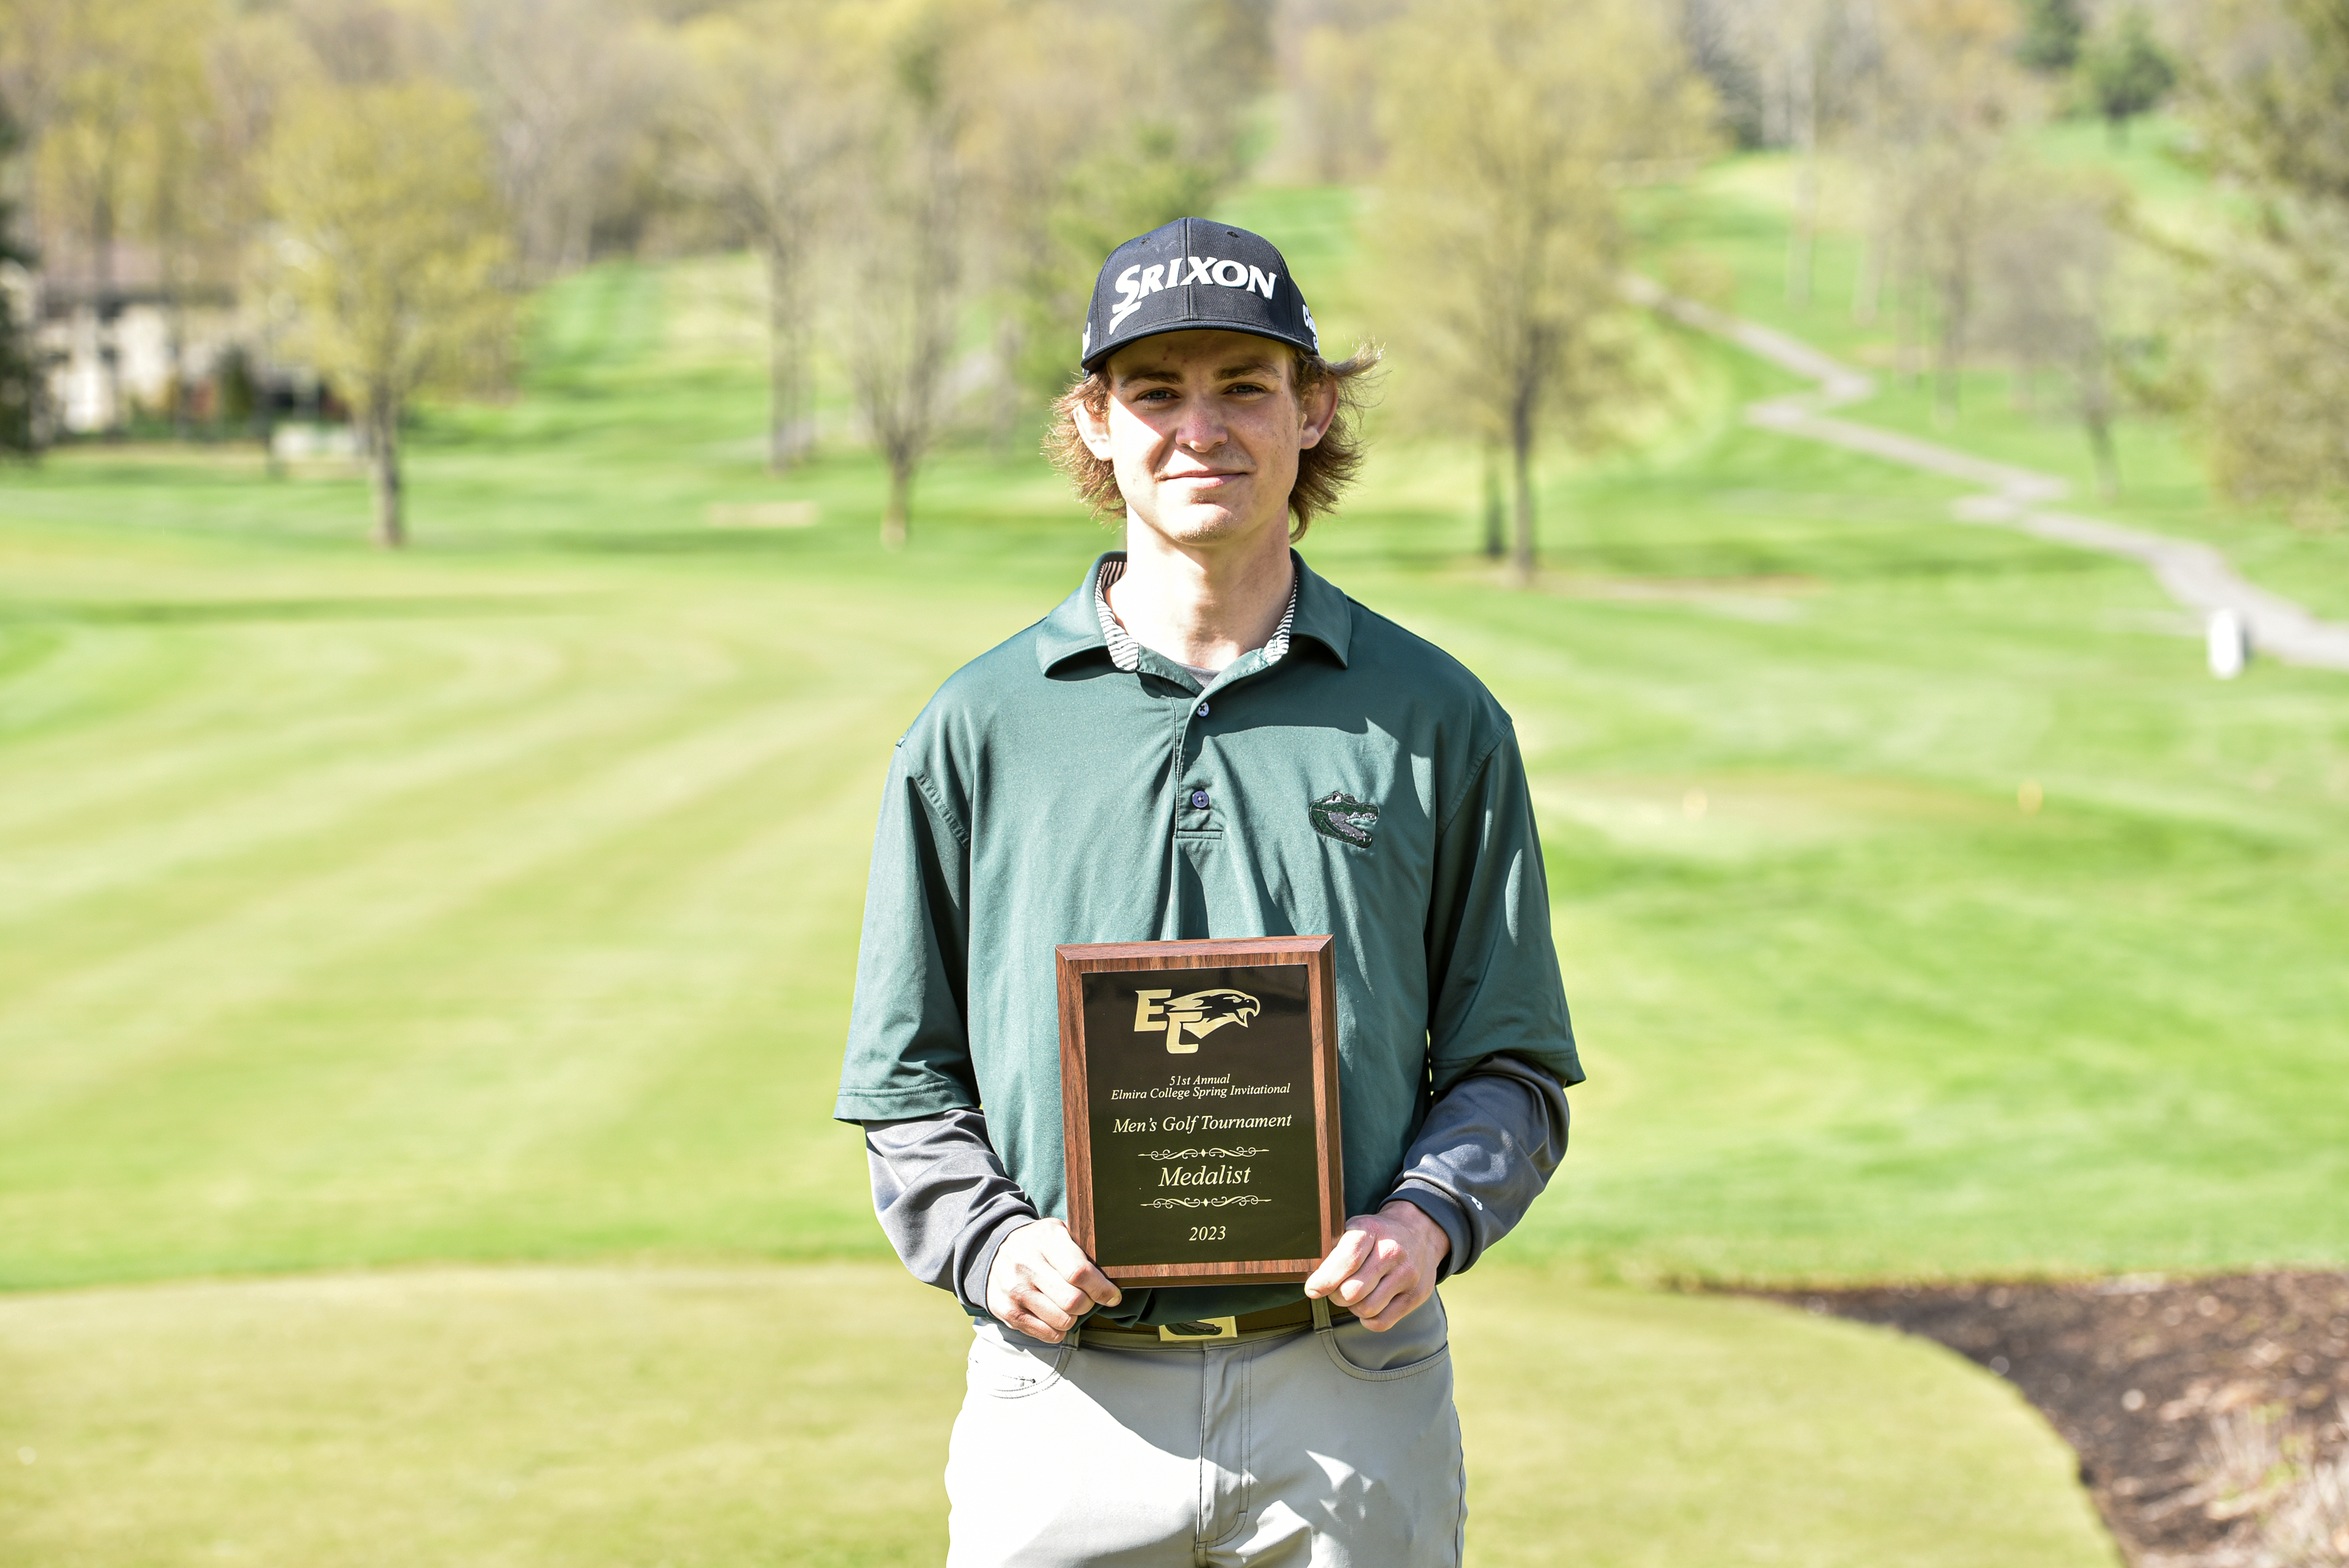 Carpenter paces RSC as he takes home medalist honors at Elmira Spring Invitational